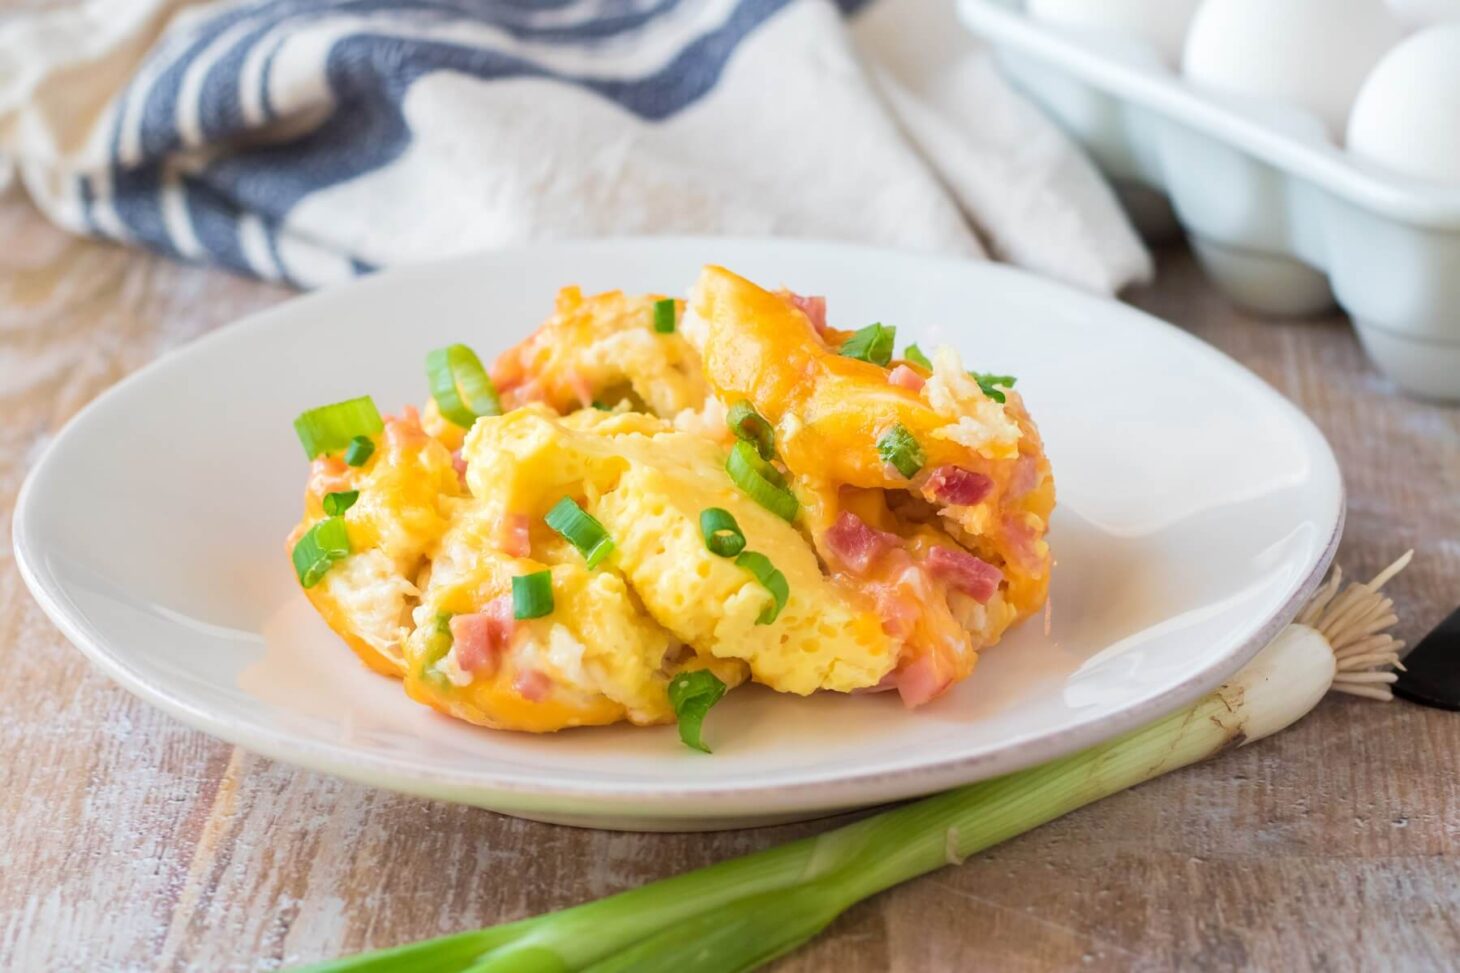 A serving of slow cooker breakfast casserole with ham, cheddar cheese, and green onions served on a white plate on a breakfast table.